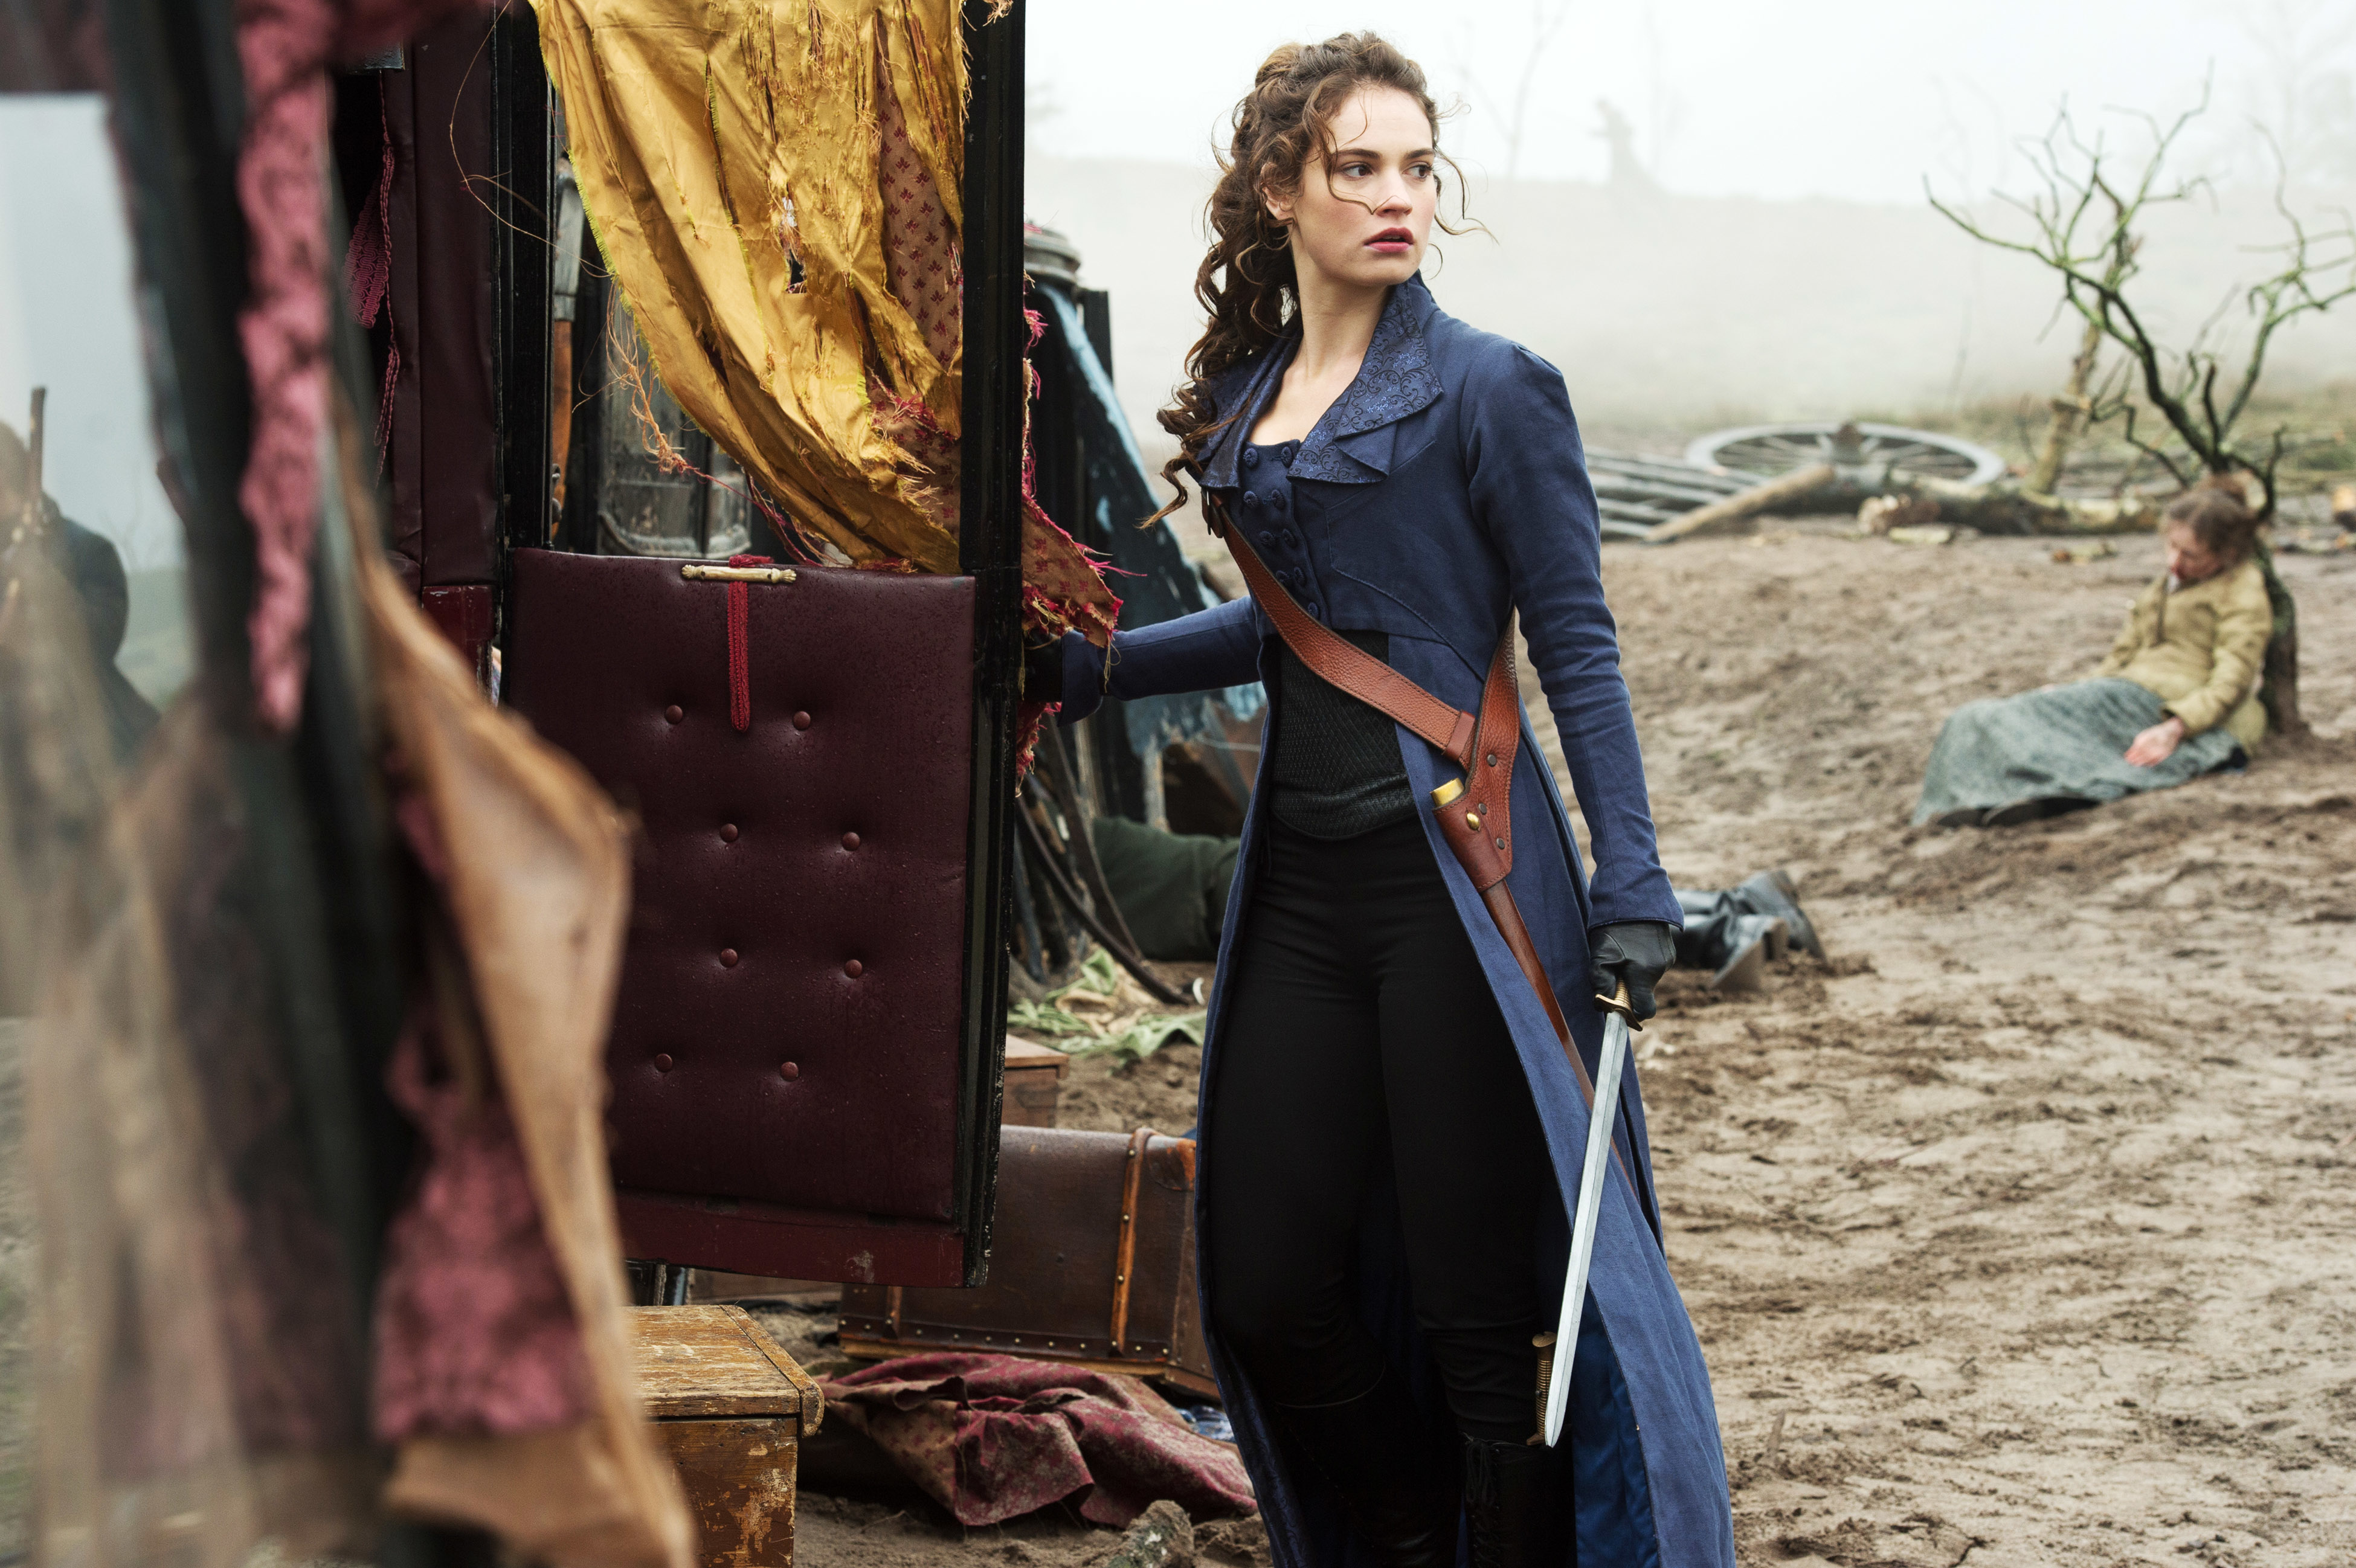 Woman in period costume with sword stands by carriage, tense scene with person on ground